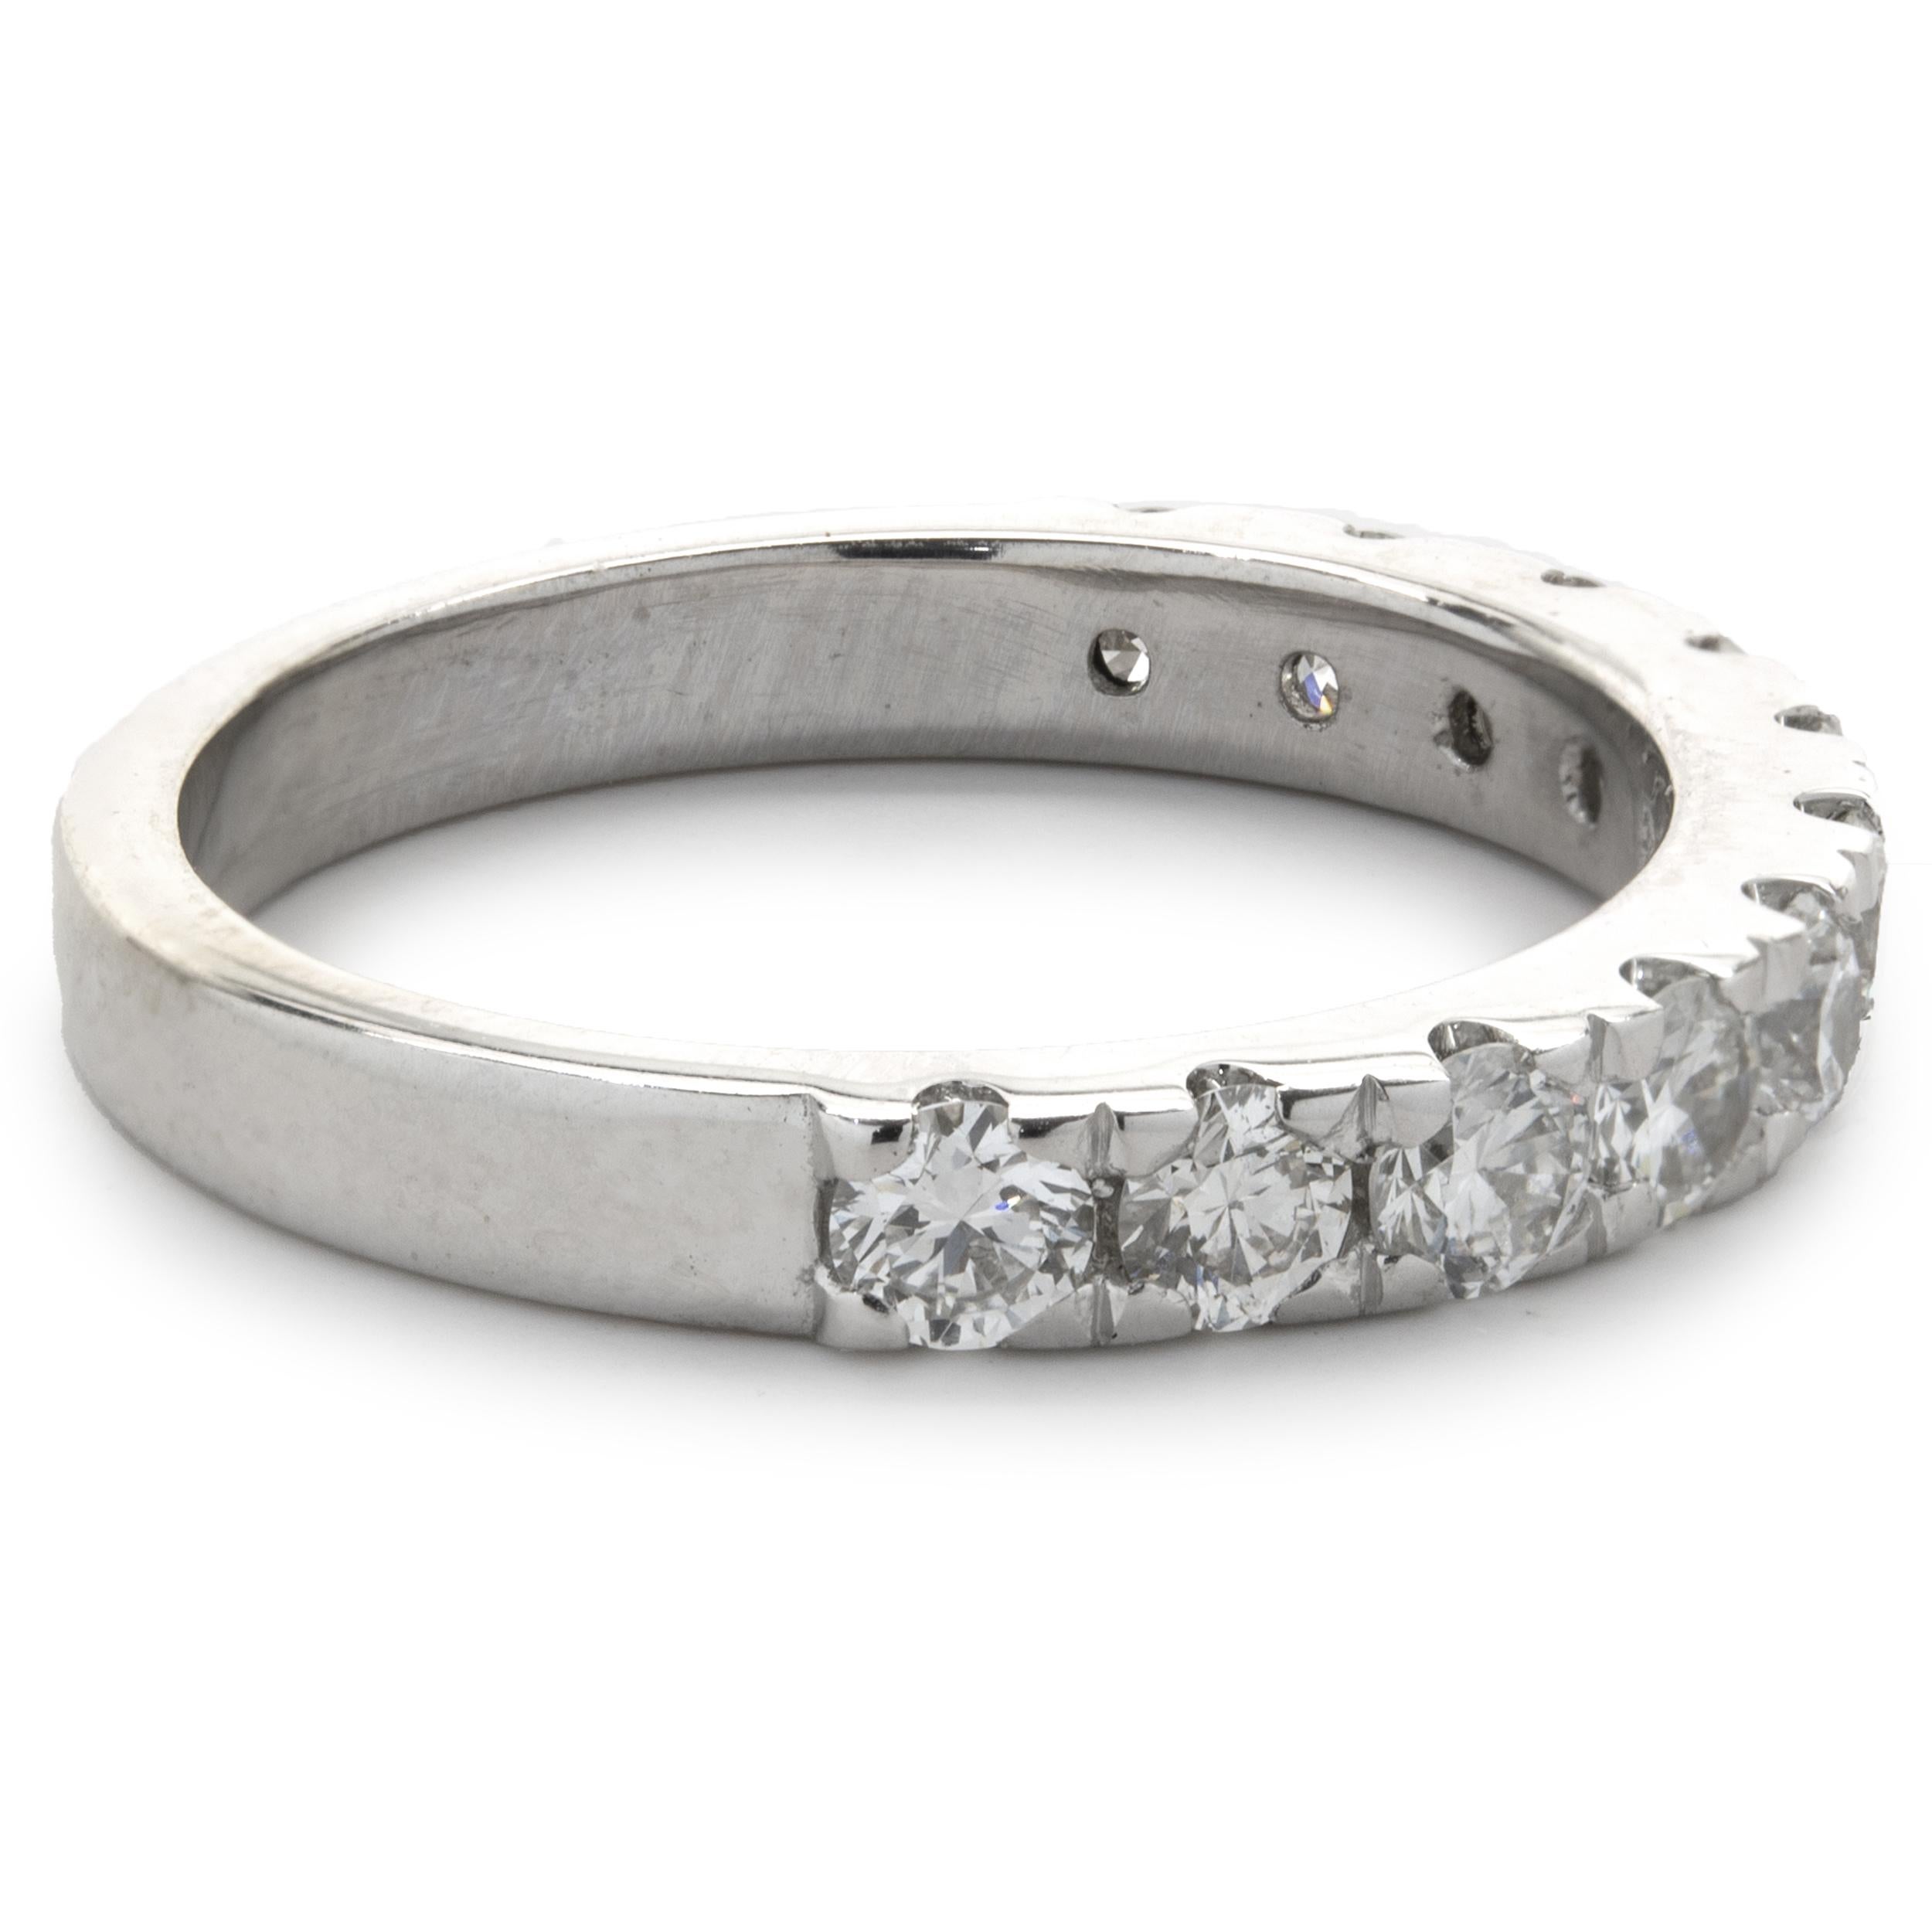 Designer: custom
Material: 14K white gold
Diamond: 11 round brilliant cut = 0.80cttw
Color: G
Clarity: SI1
Ring size: 6.25 (please allow two additional shipping days for sizing requests)
Weight: 2.73 grams
